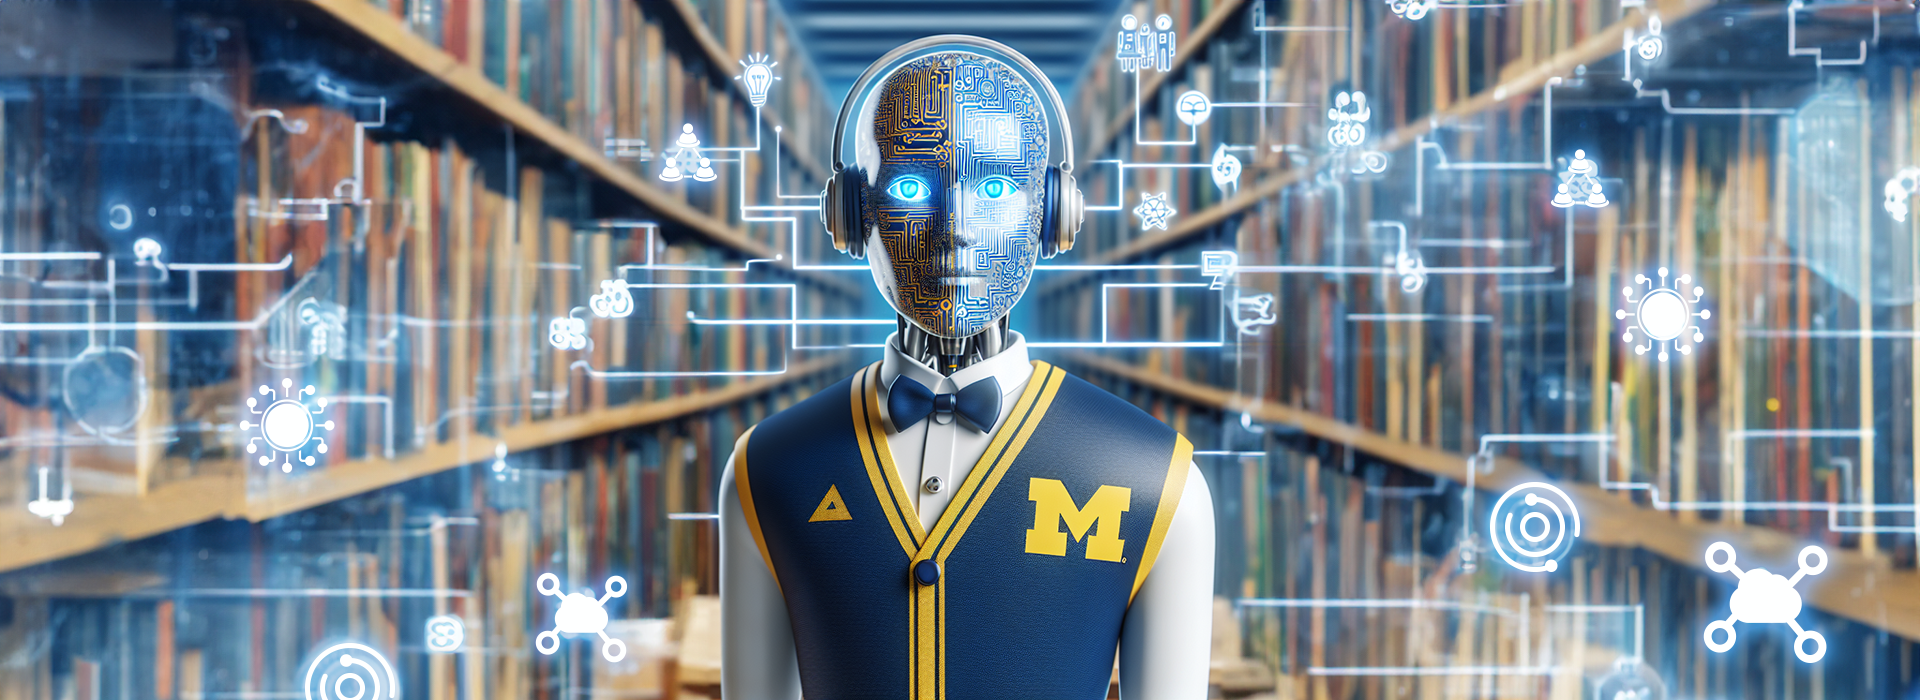 AI robot with a U-M vest on standing in the U-M library.